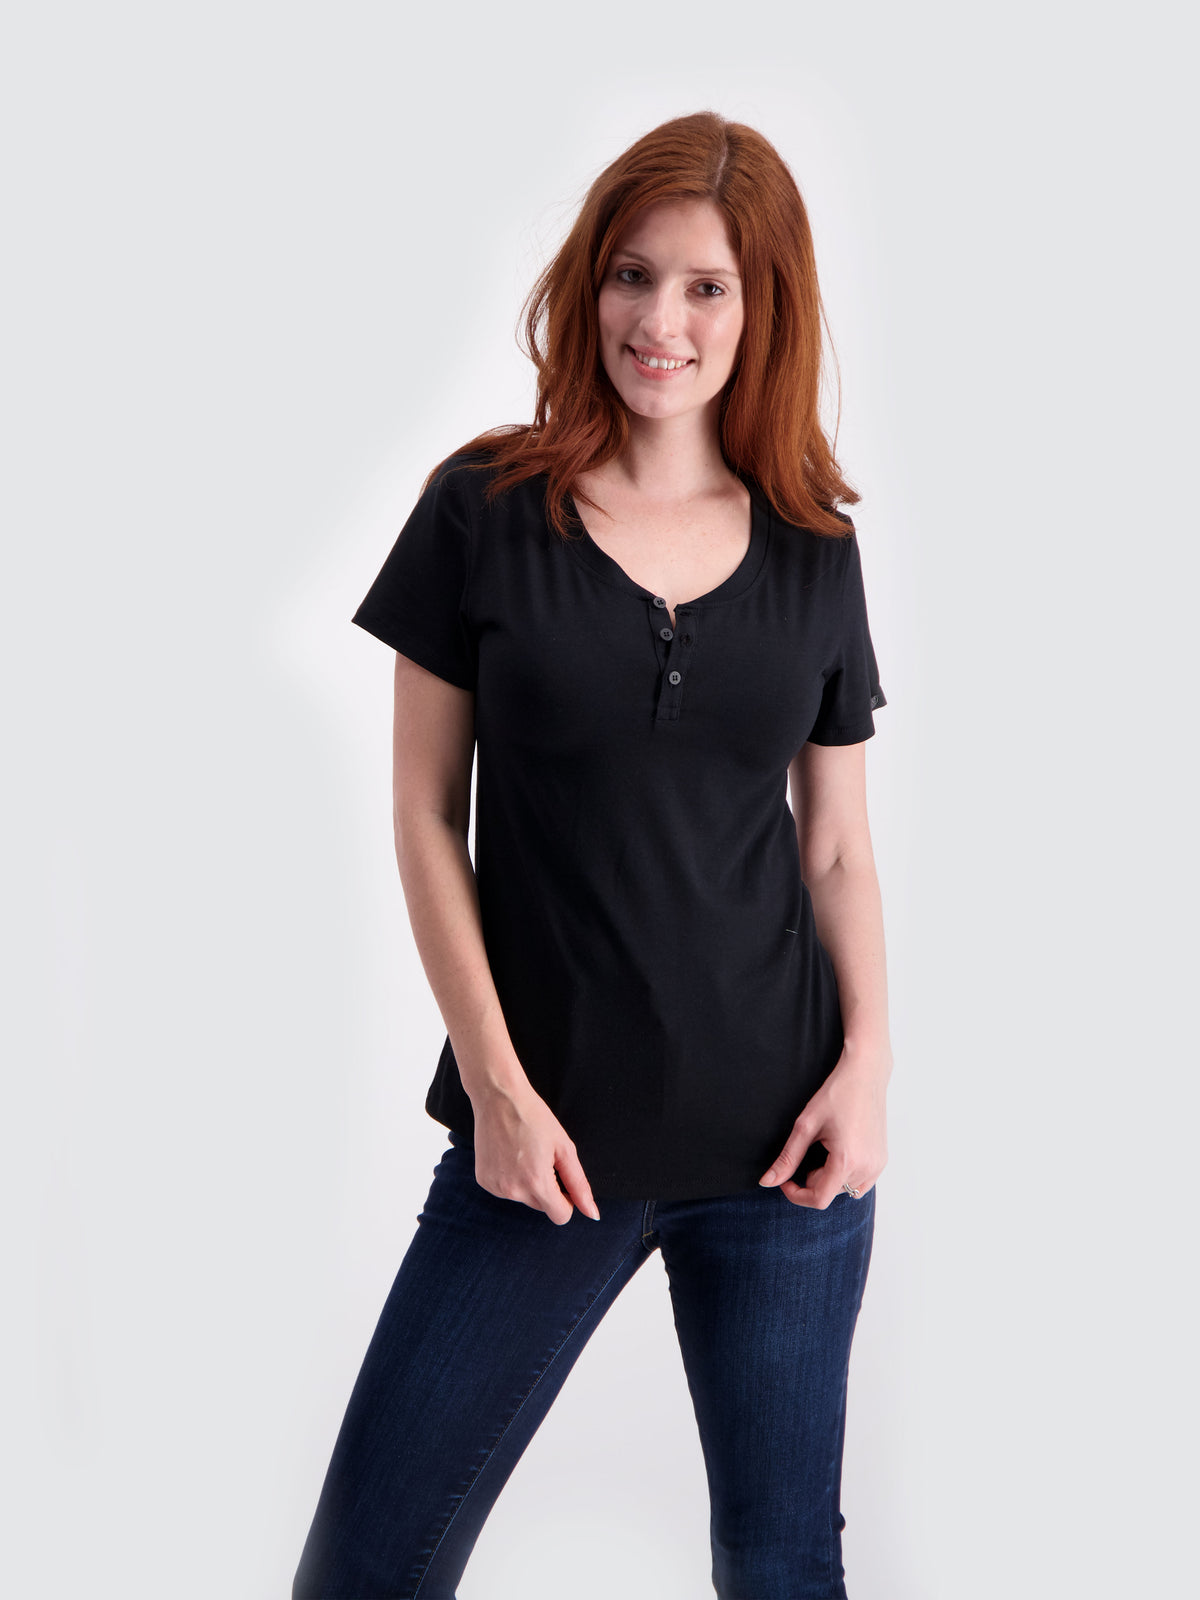 Two Blind Brothers - Womens Women's Short Sleeve Henley Charcoal